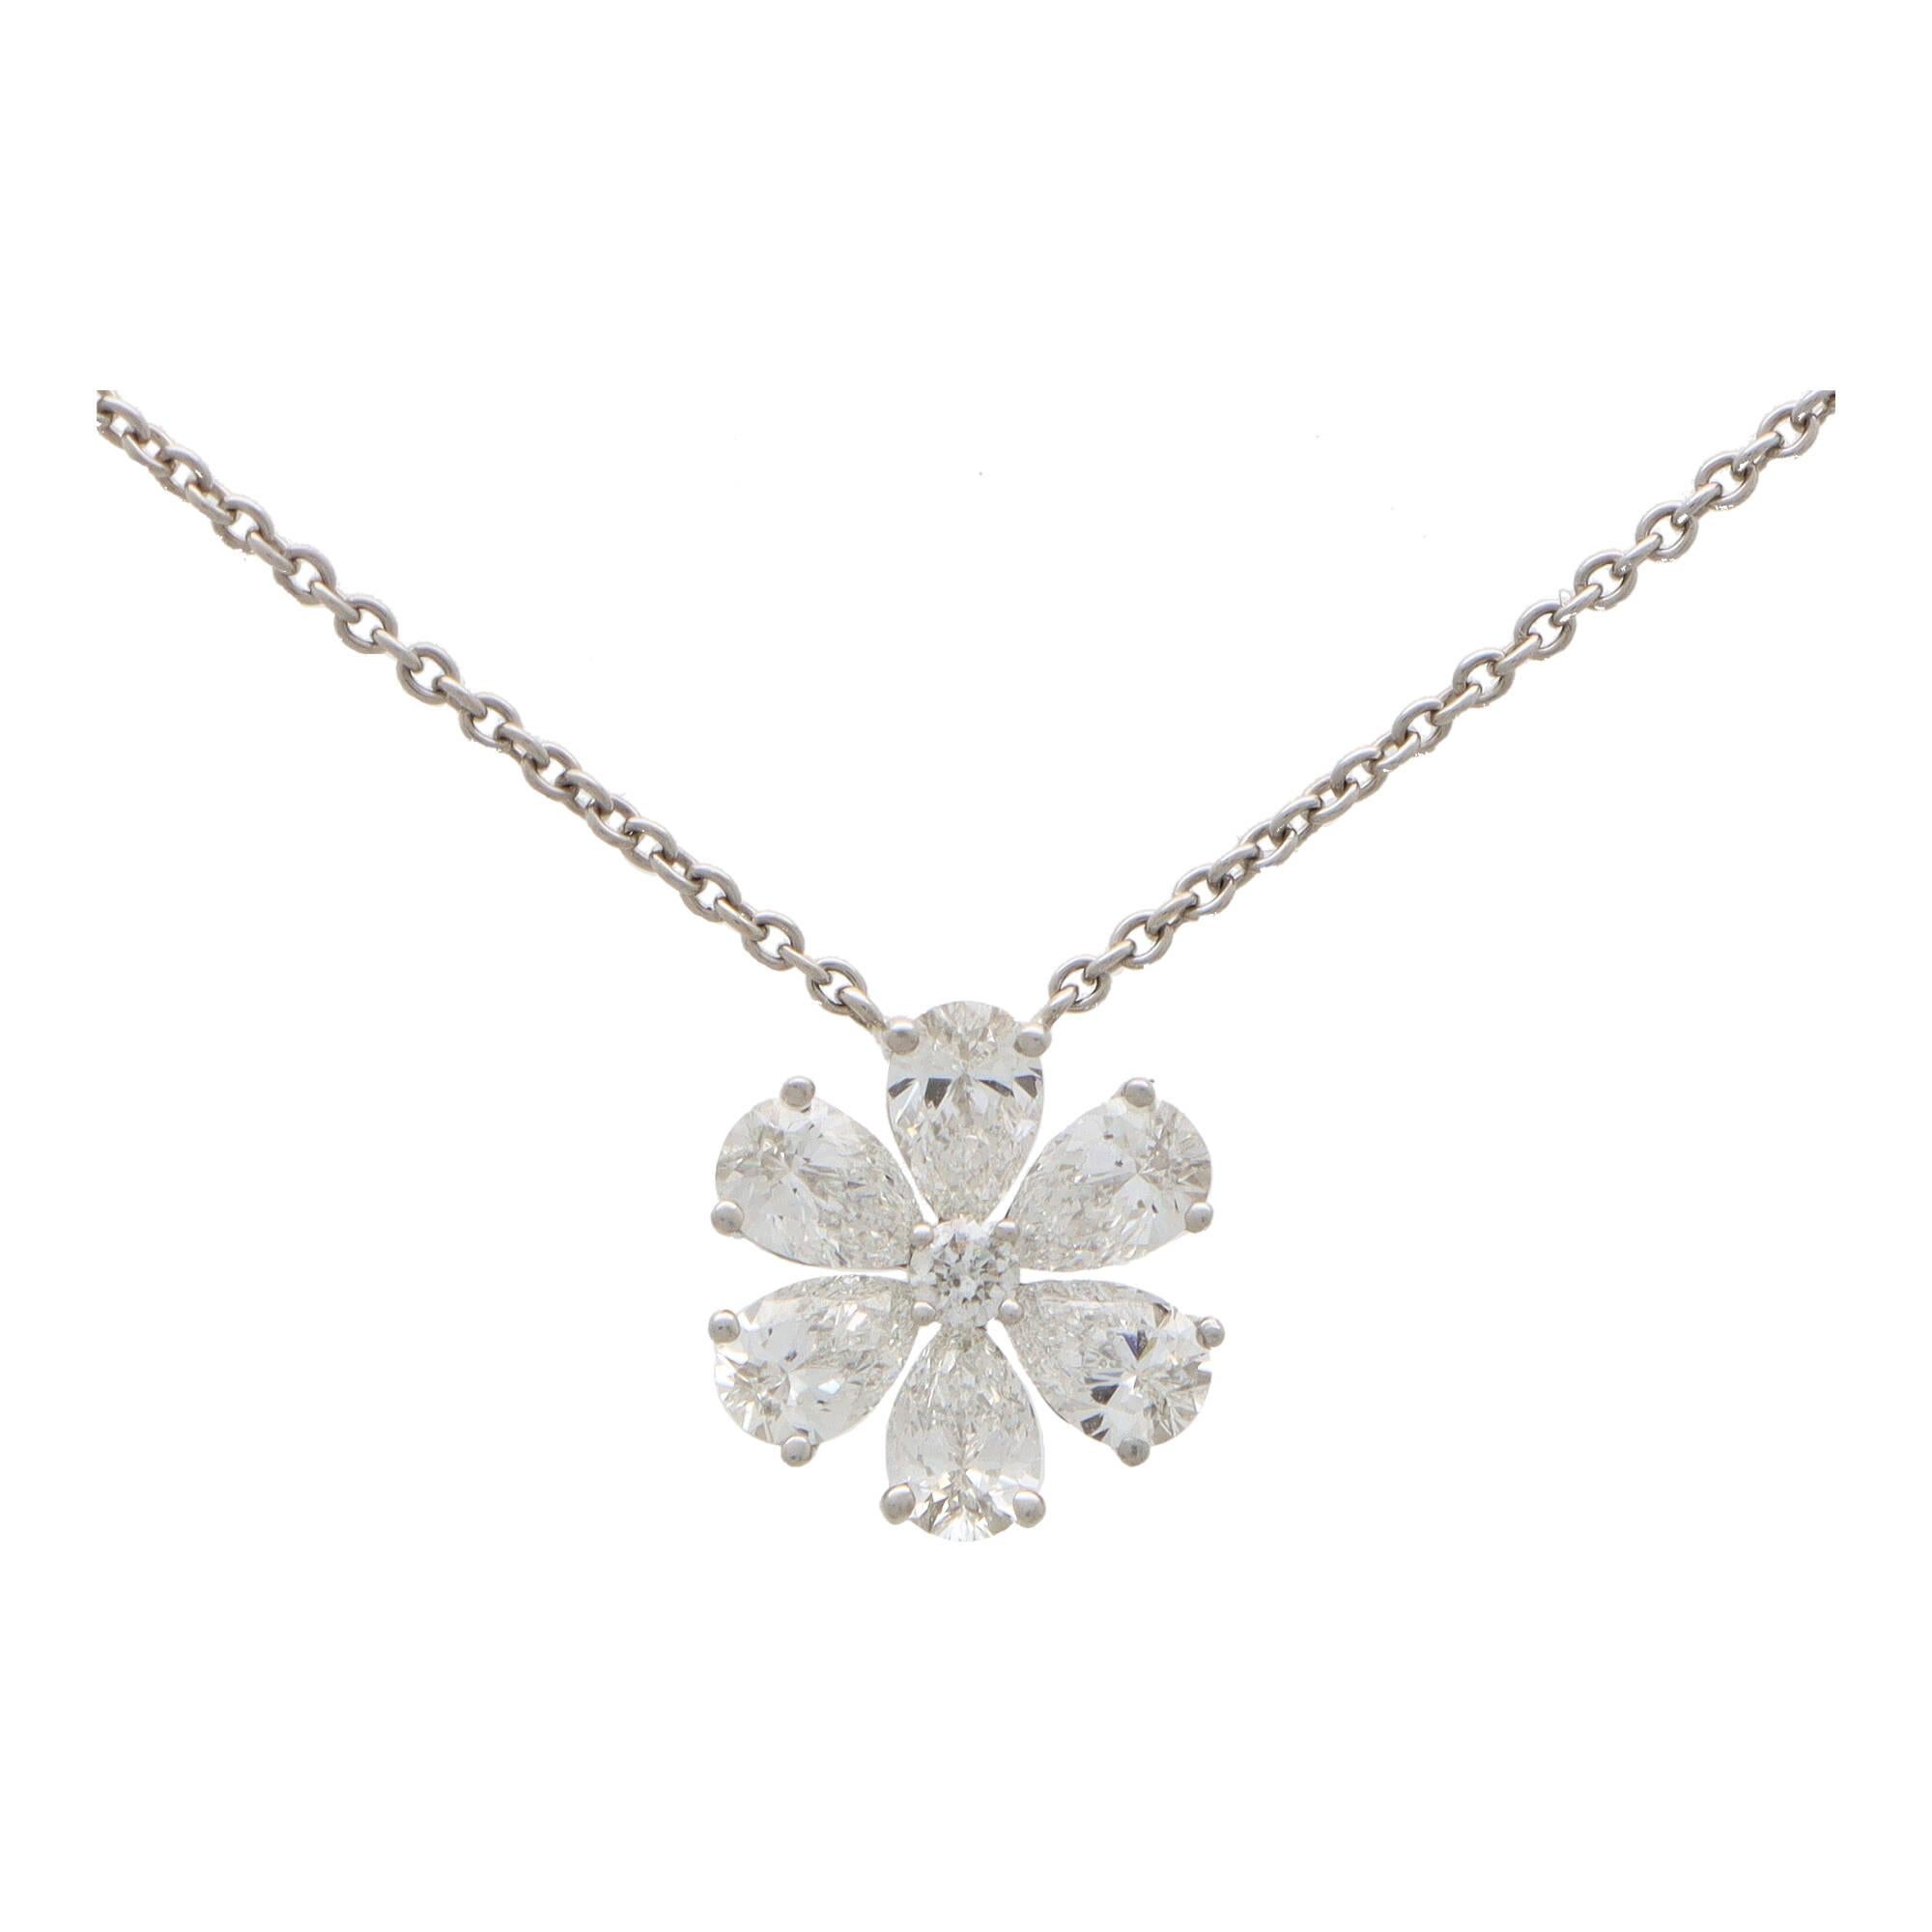 A vintage Harry Winston ‘Forget Me Not’ diamond flower pendant necklace set in platinum. 

From a current Harry Winston collection, the pendant is comprised of six sparkly pear brilliant cut diamonds surround a petite round brilliant cut diamond.